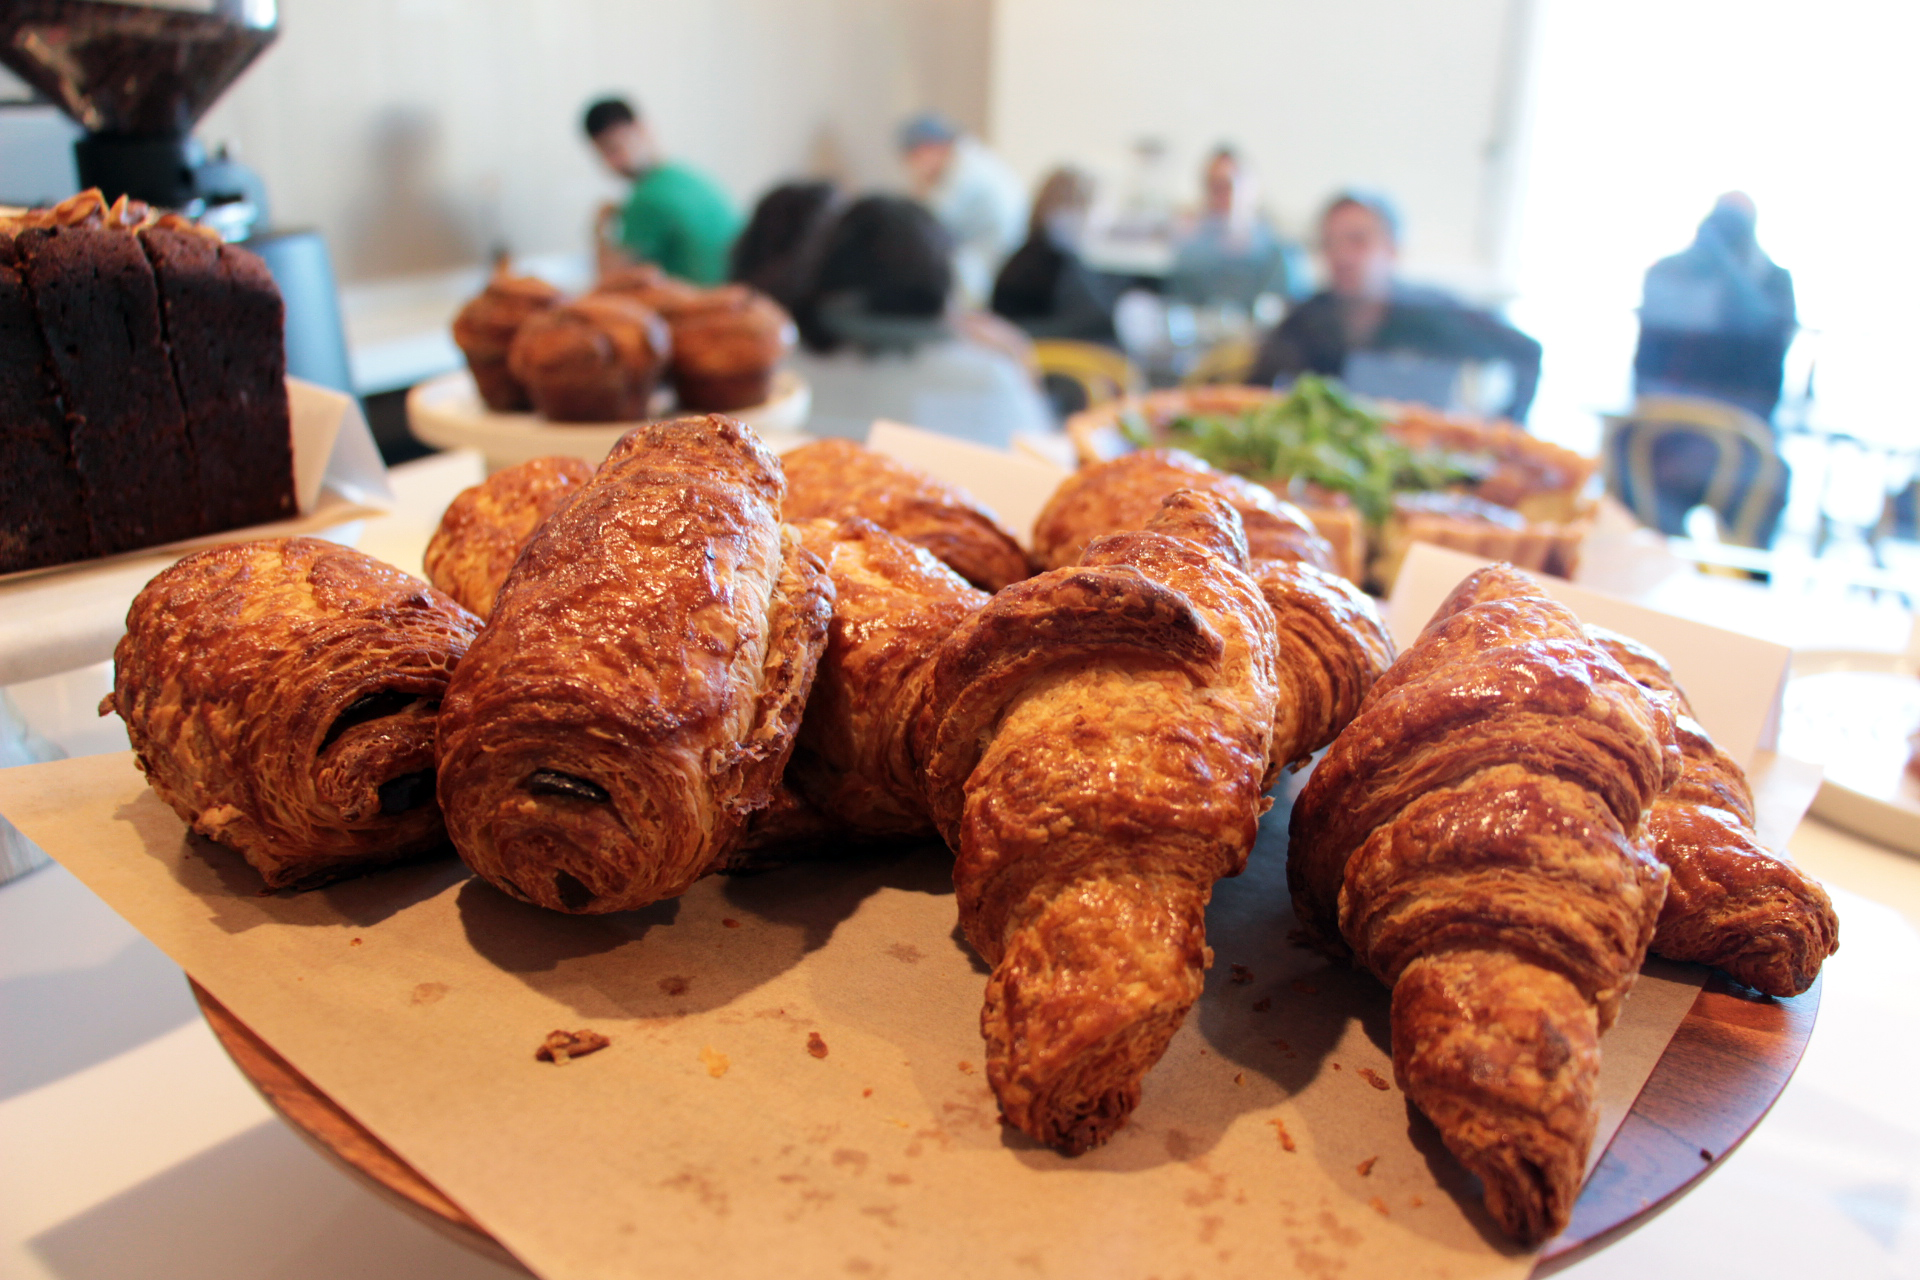 Buttery housemade croissants